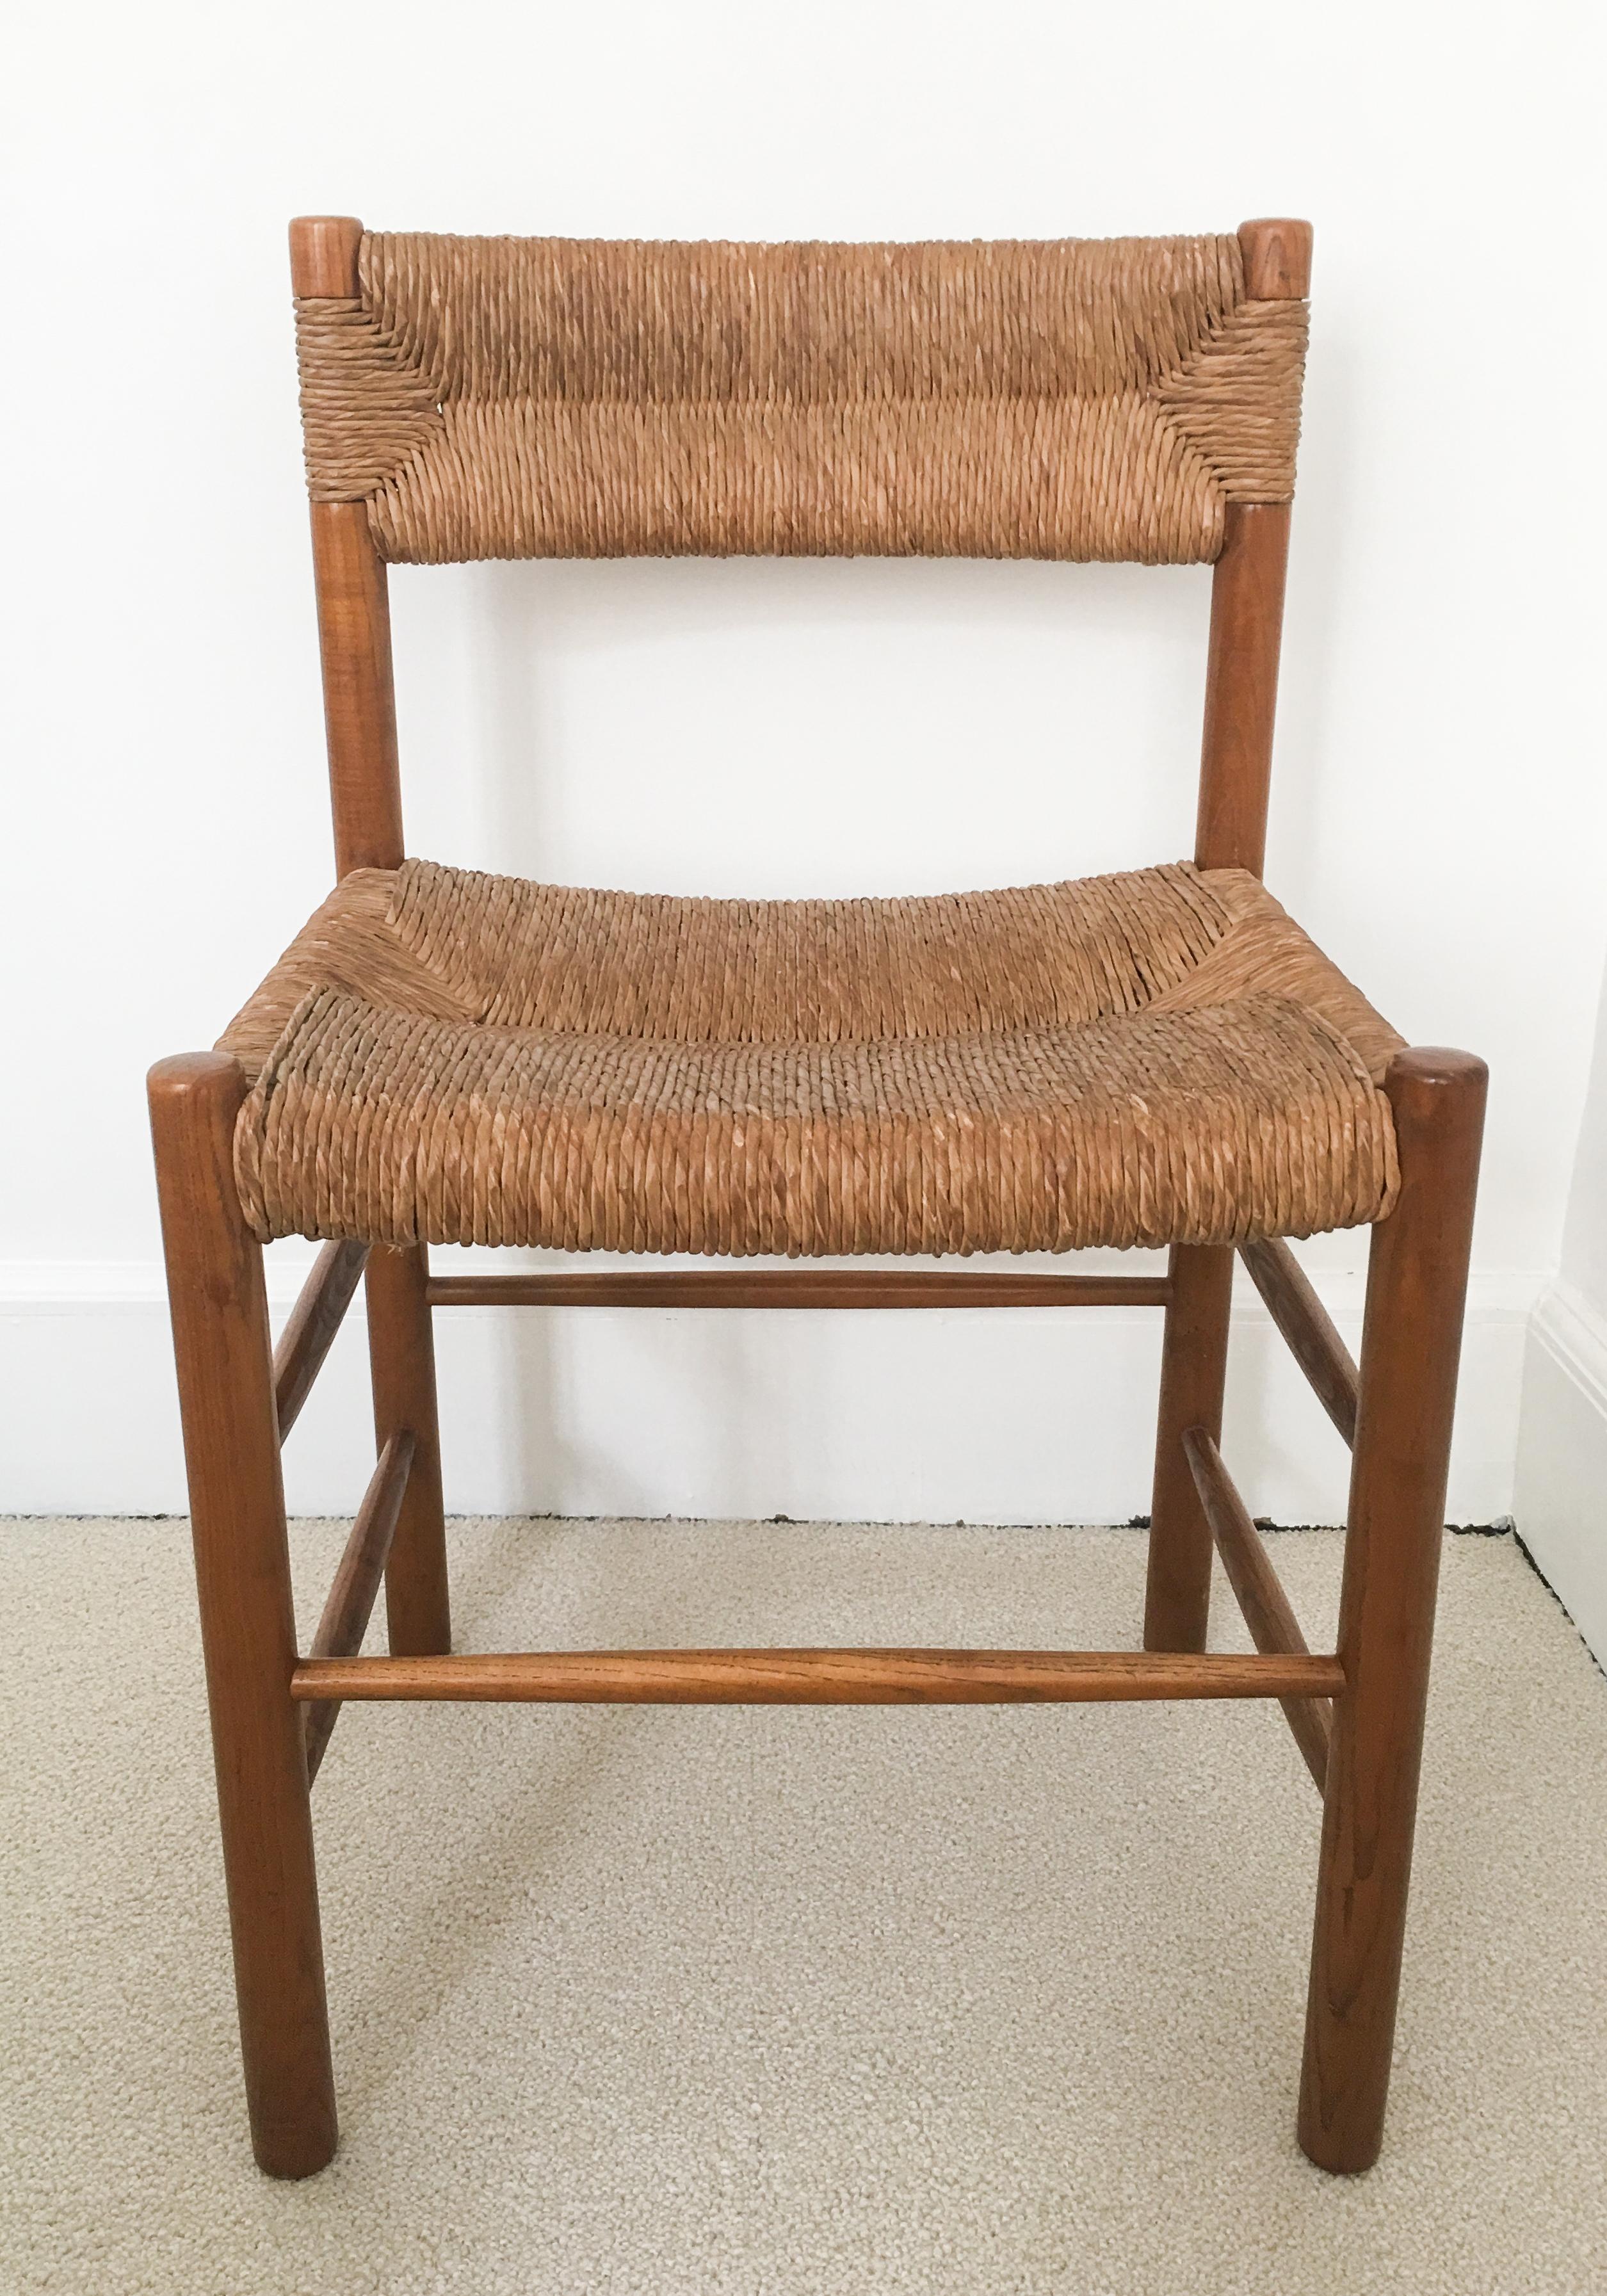 This pair of chairs byr Robert Sentou is of the model 